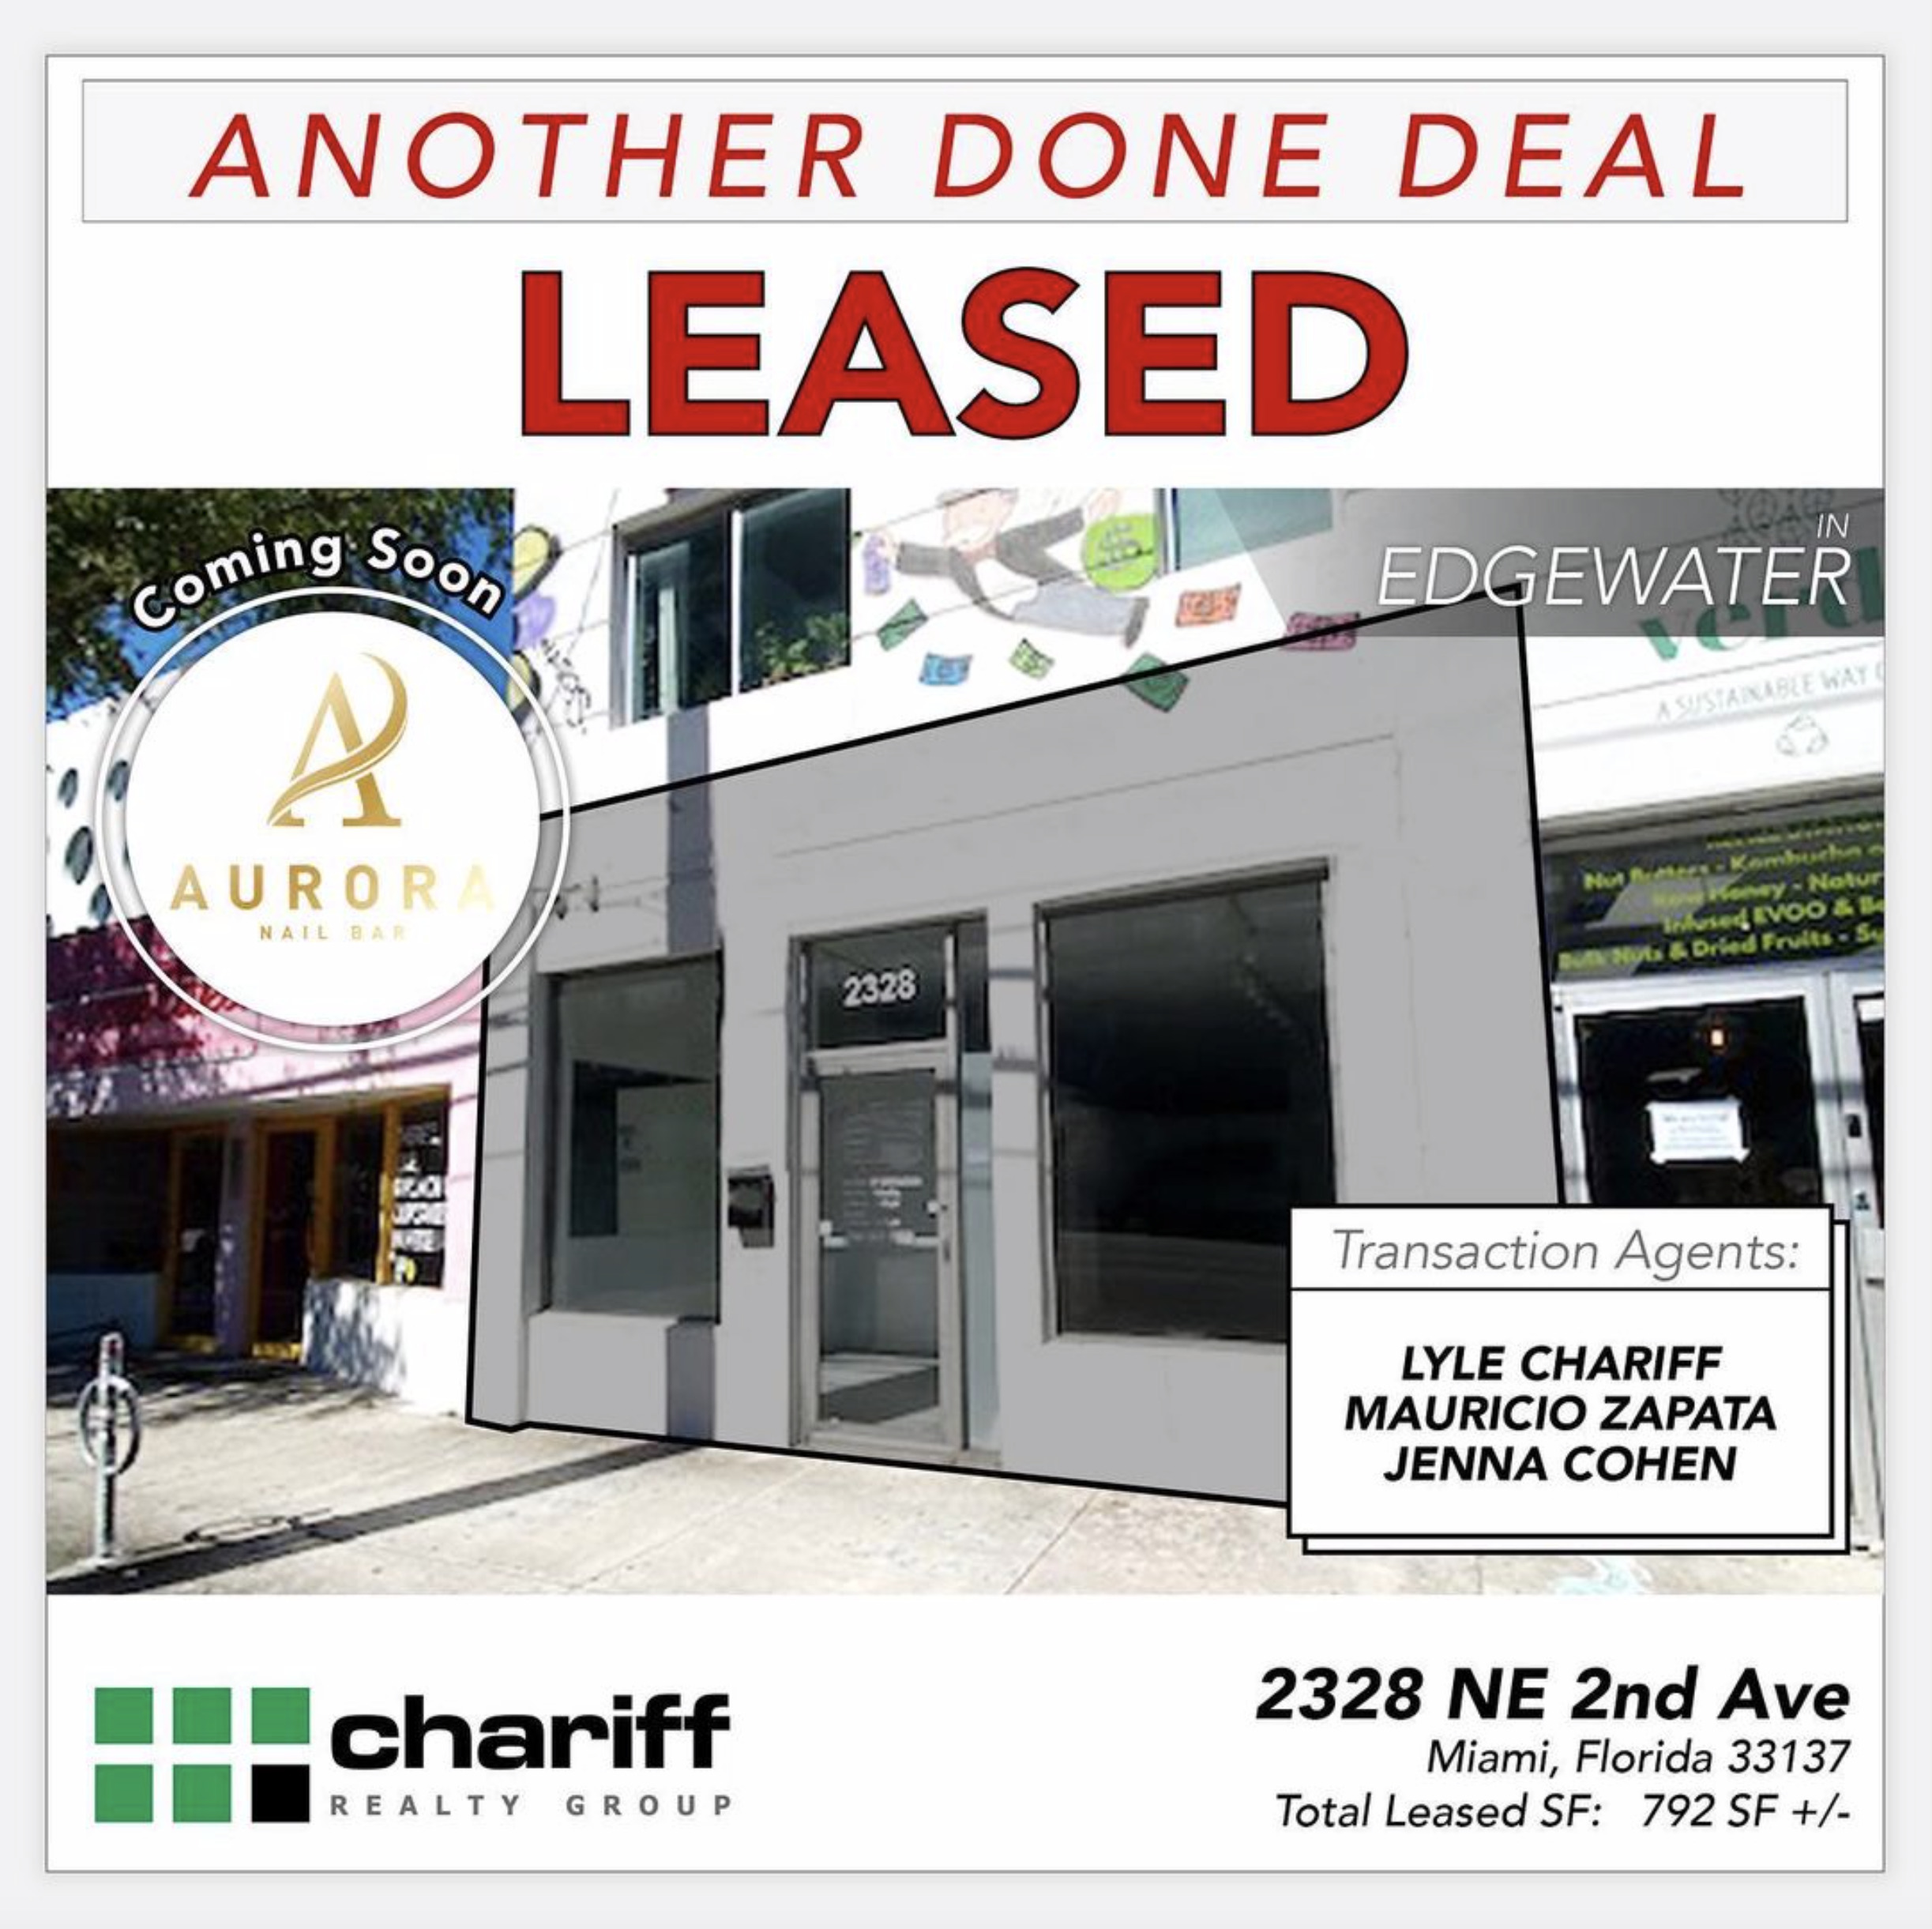 2328 NE 2nd Ave - Another Done Deal - Leased - Edgewater - Miami-Florida-33137-Chariff Realty Group